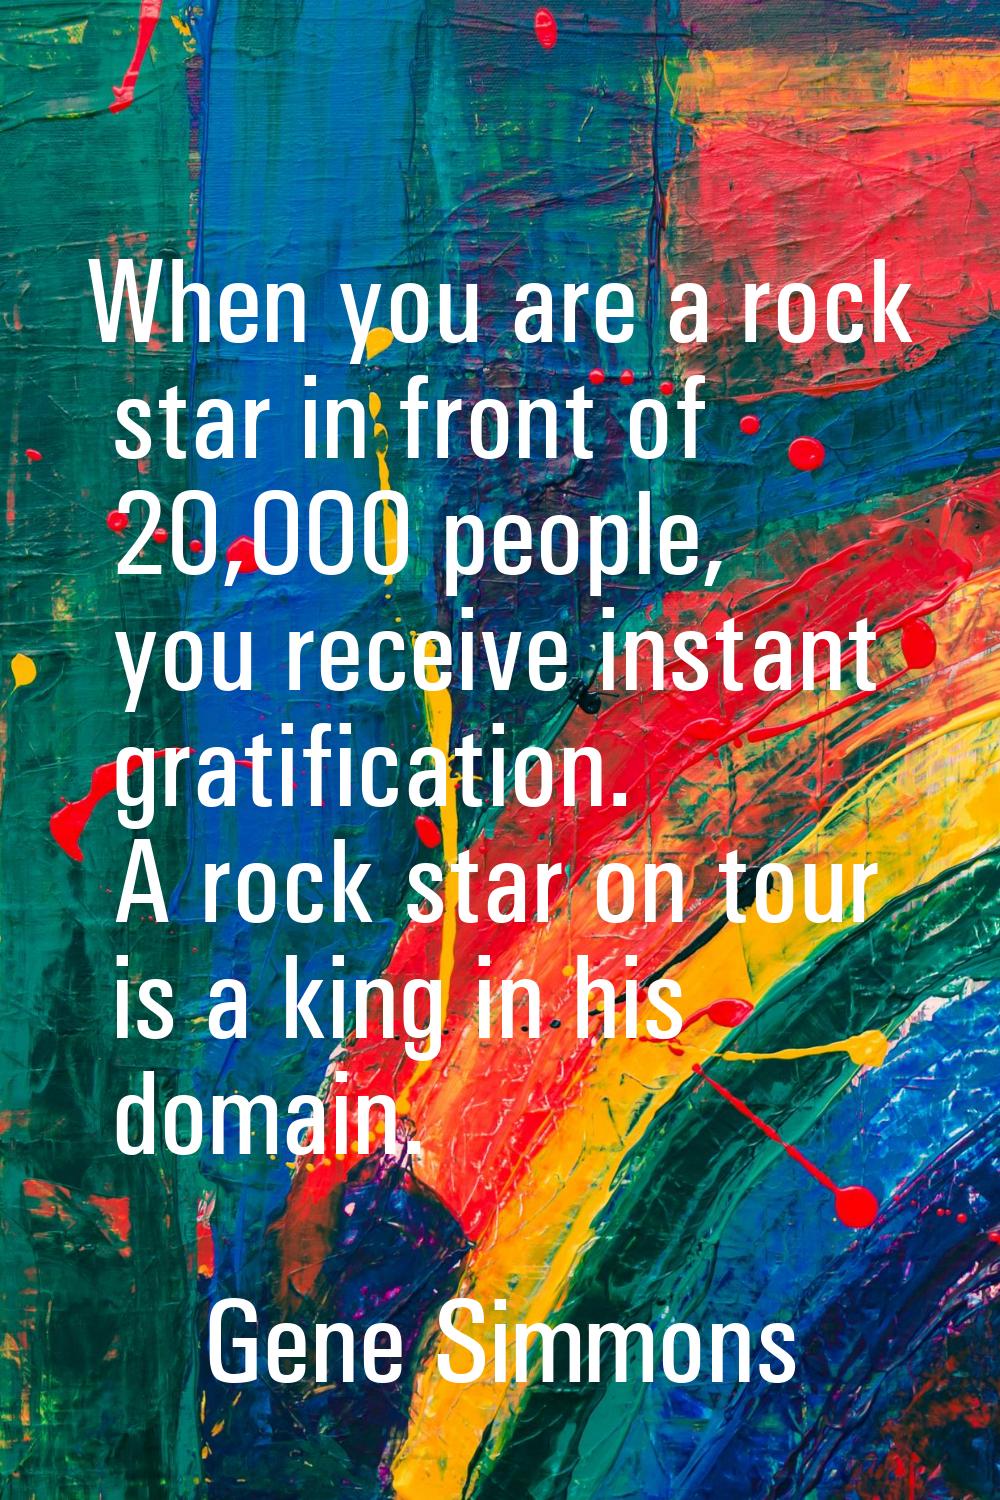 When you are a rock star in front of 20,000 people, you receive instant gratification. A rock star 